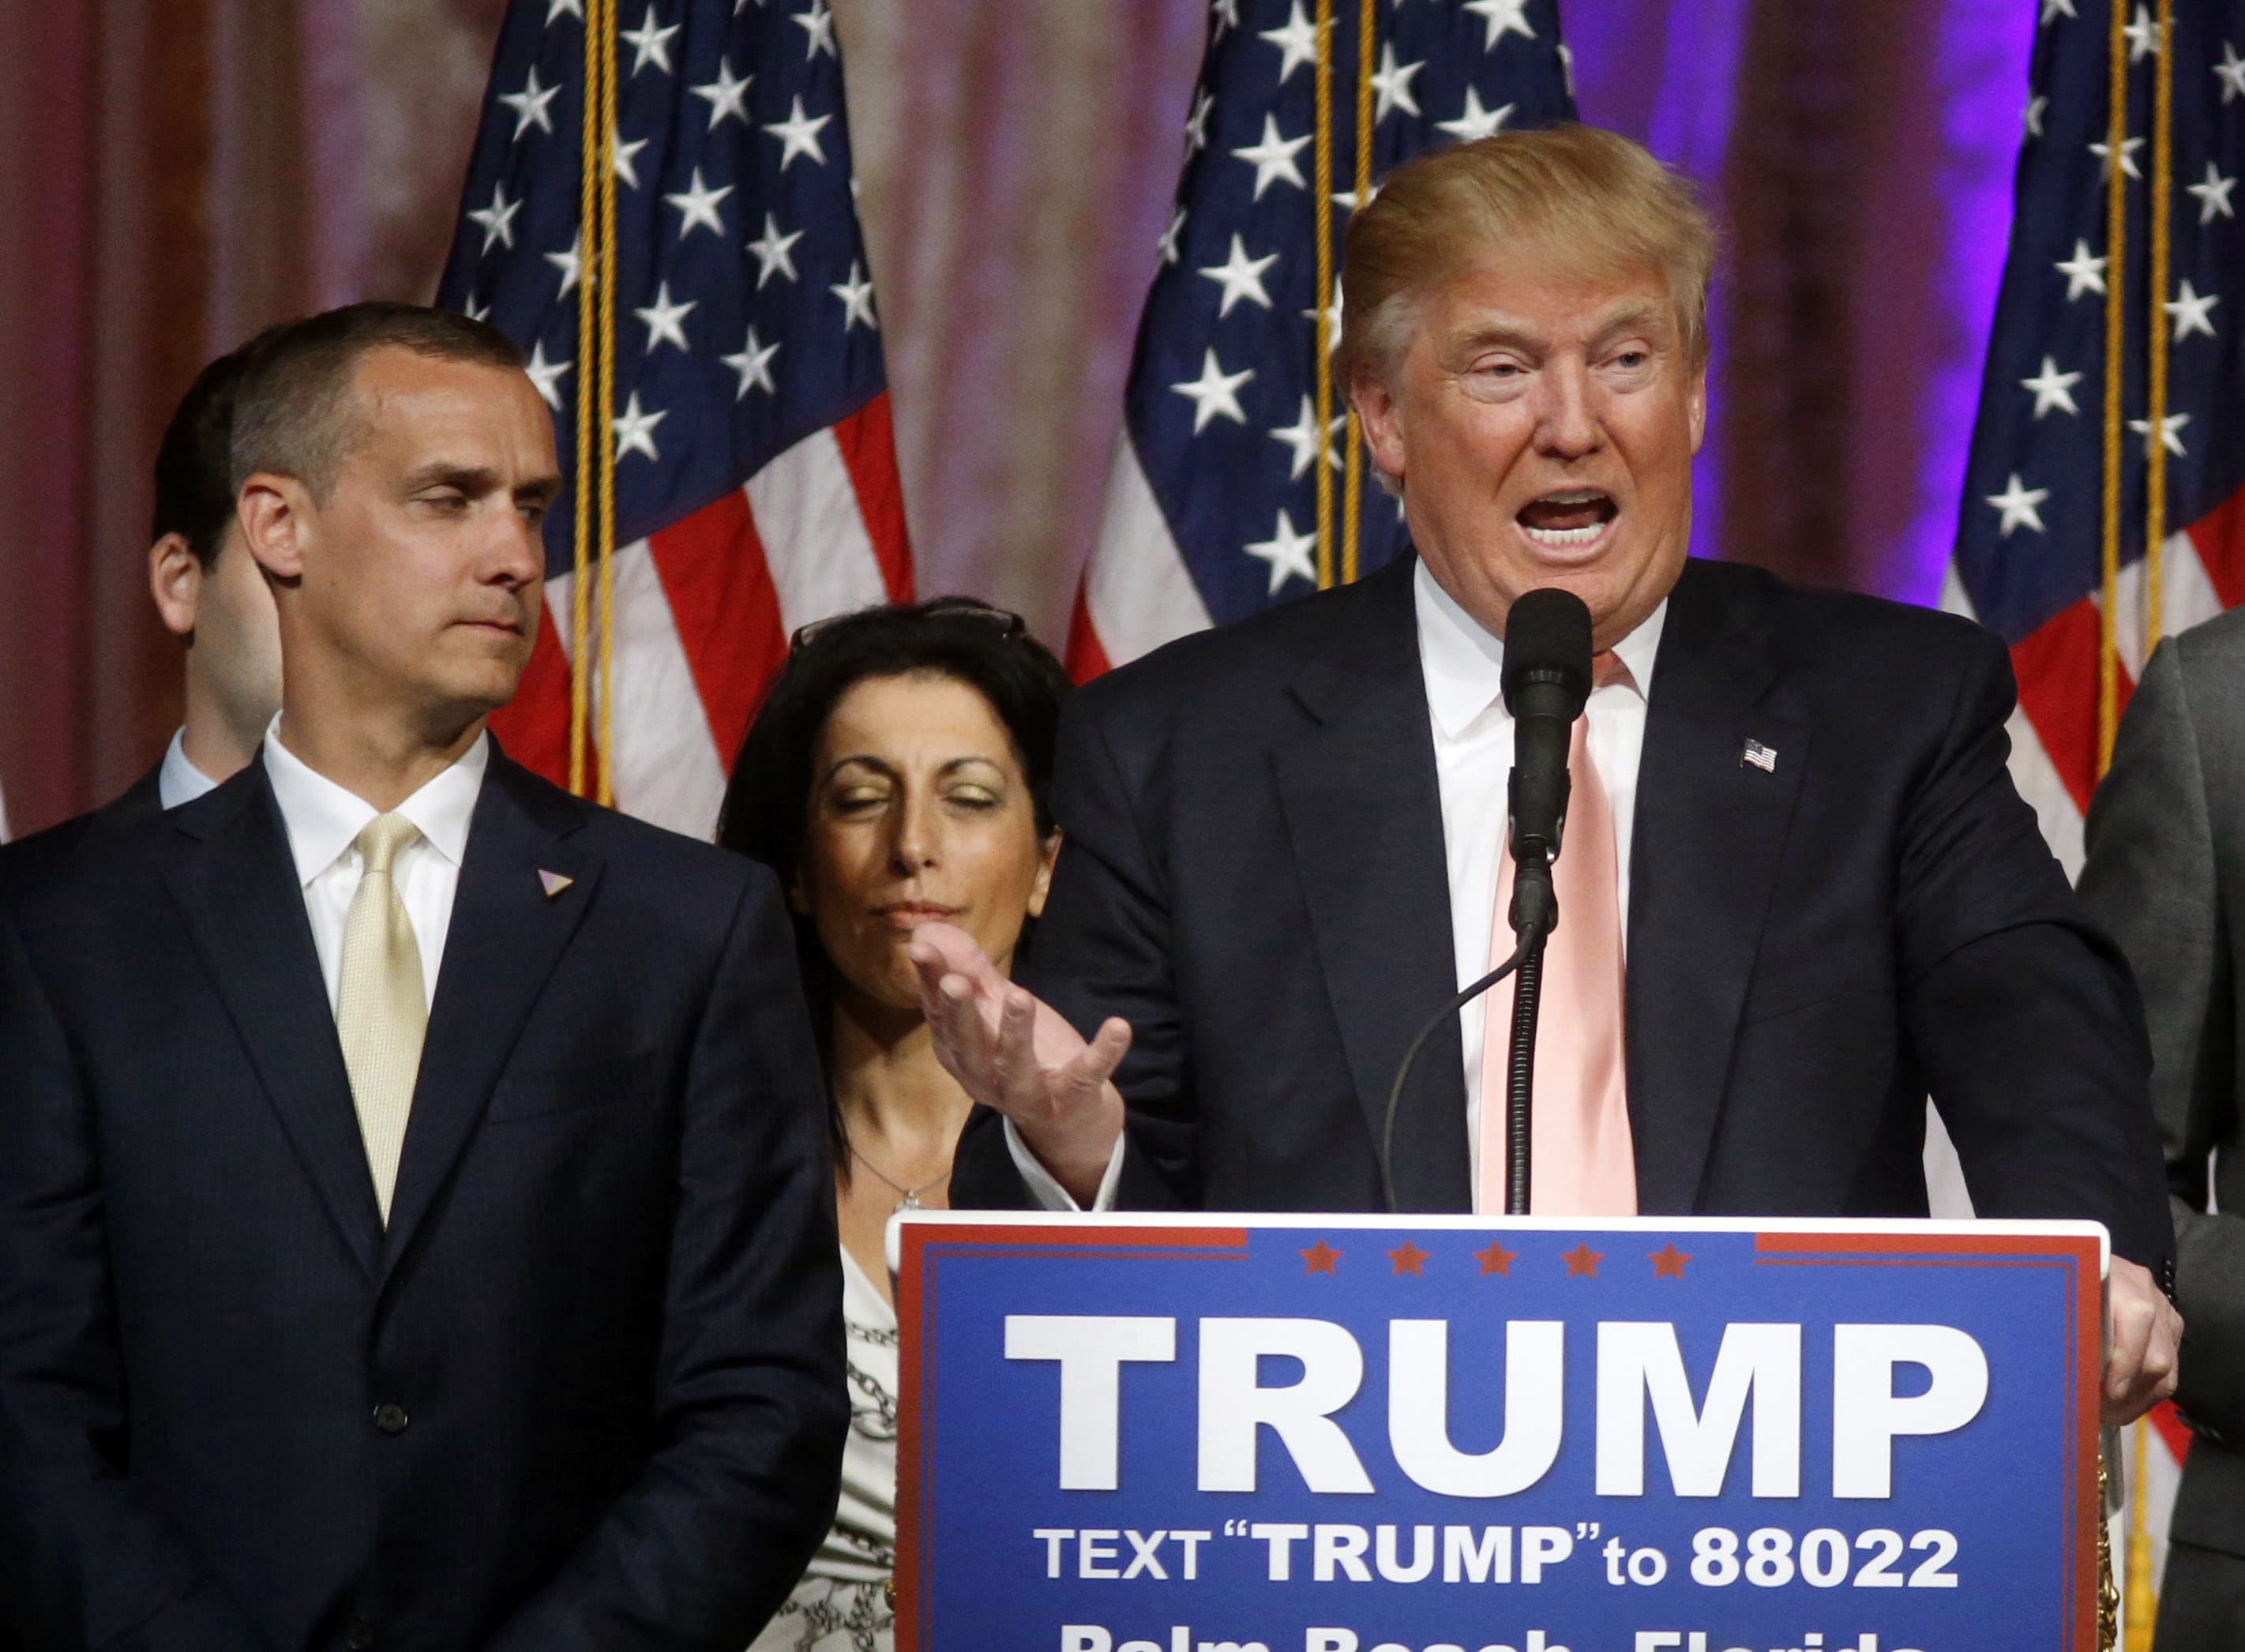 FILE - In this March 15, 2016, file photo, Republican presidential candidate Donald Trump speaks to supporters at his primary election night event at his Mar-a-Lago Club in Palm Beach, Fla., as campaign manager Corey Lewandowski listens at left. Trumps penchant for encouraging rivalries and pitting even those closest to him against each other is roiling his Republican presidential campaign as he plunges into the general election. The tensions boiled over last week with the abrupt ouster of political director Rick Wiley, who left the campaign after just six weeks.